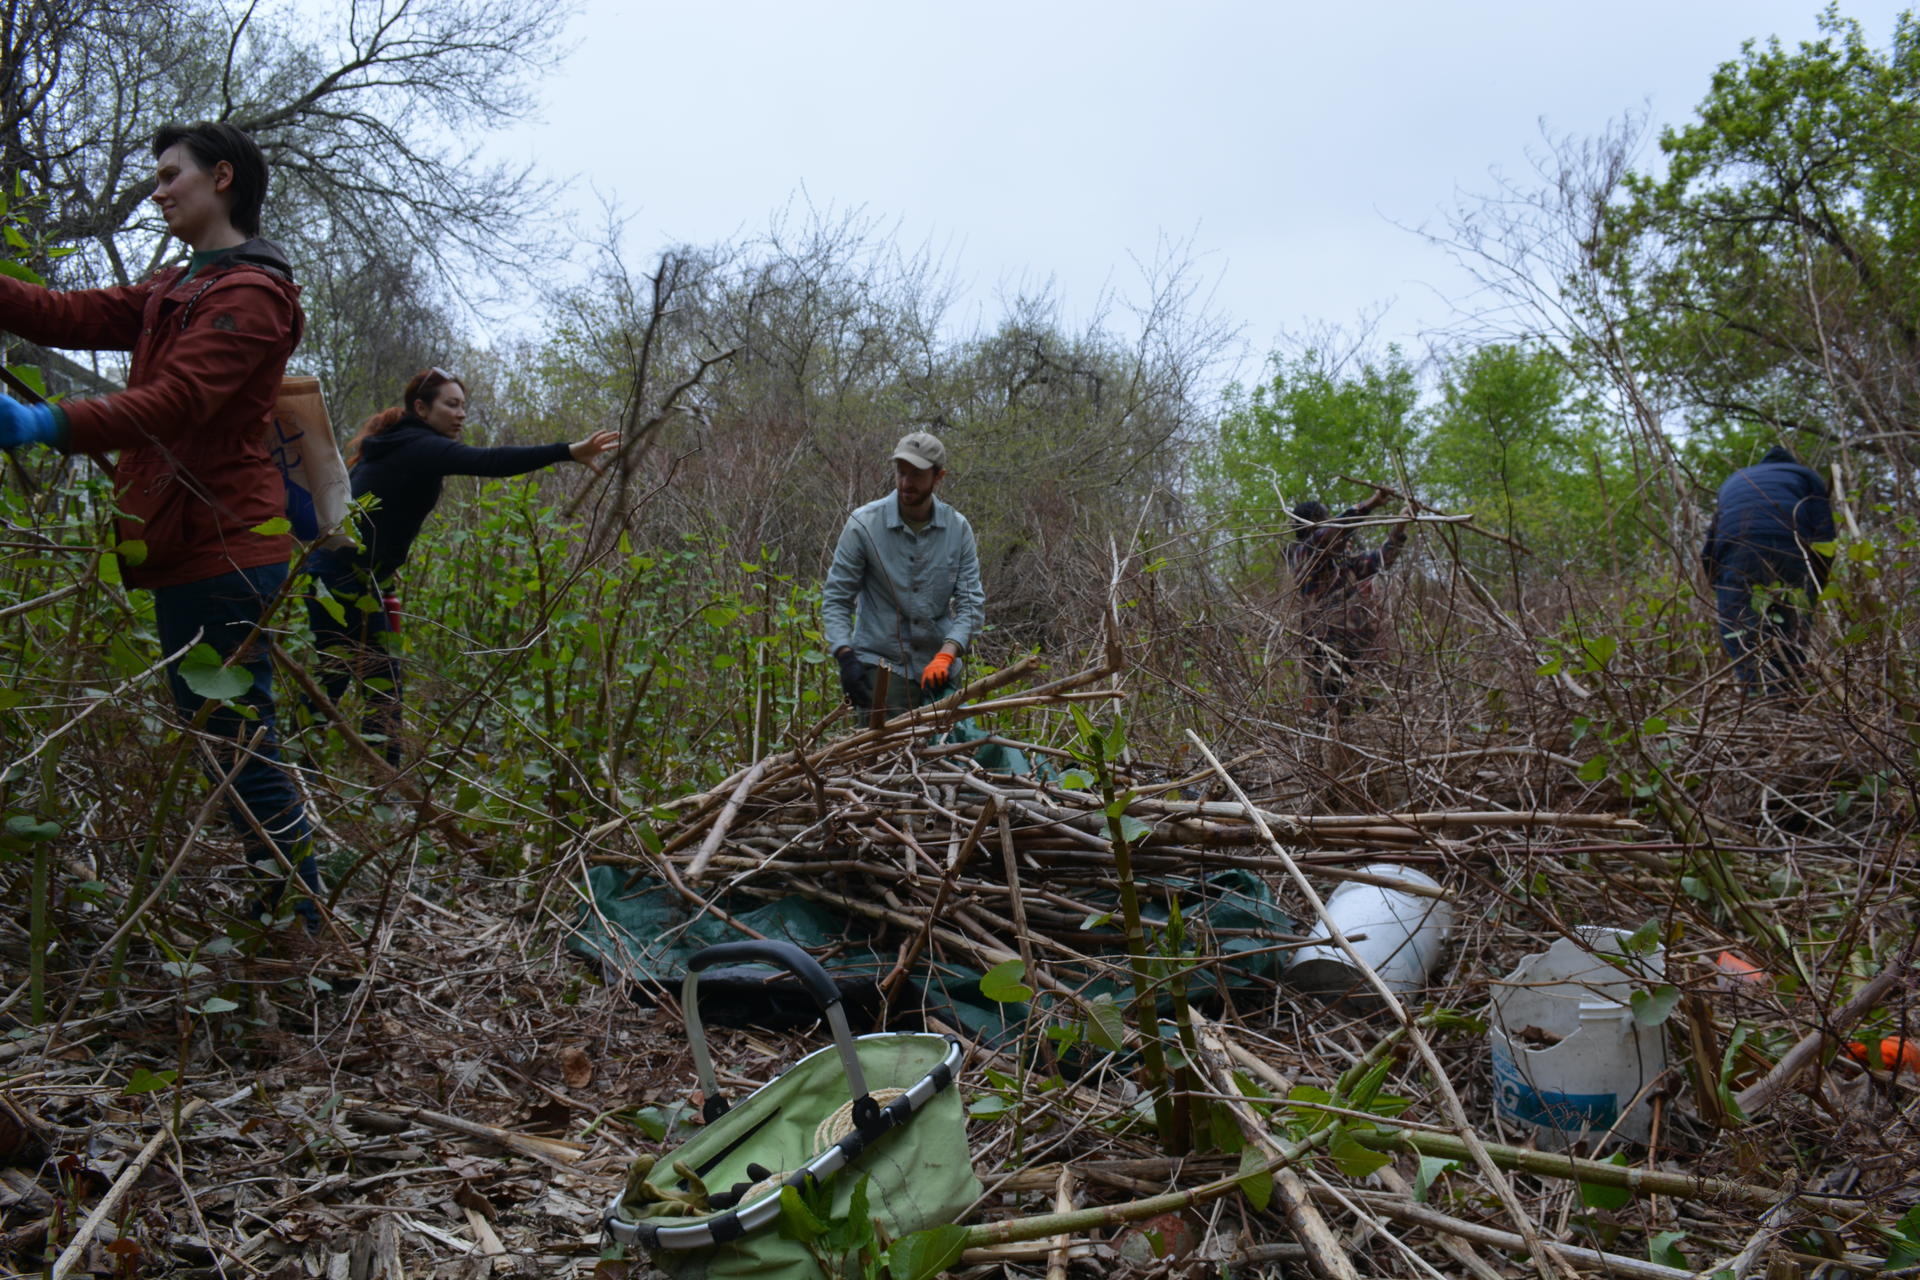 five people, in a forest of knotweed near Gano Park, actively harvesting the plant onto a tarp